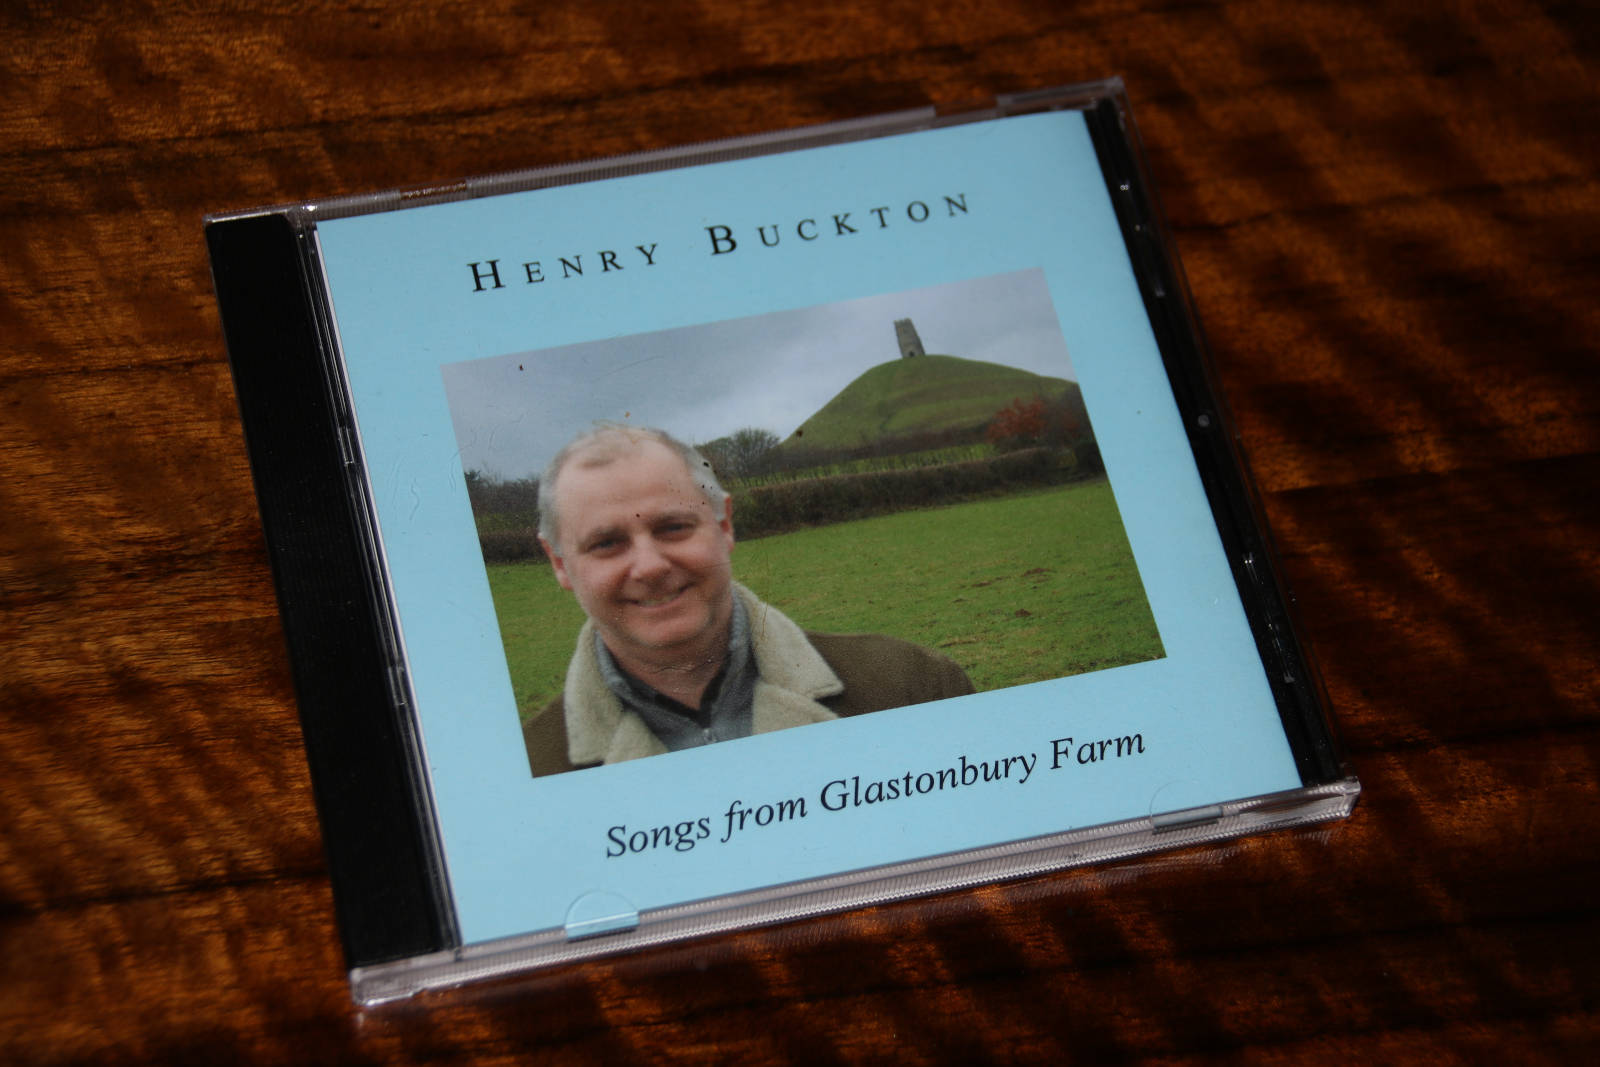 Image of henry_buckton_songs_from_glastonbury_farm.jpg 2019-09-30 - Farkfest, the Family Field.  The story can now be told.